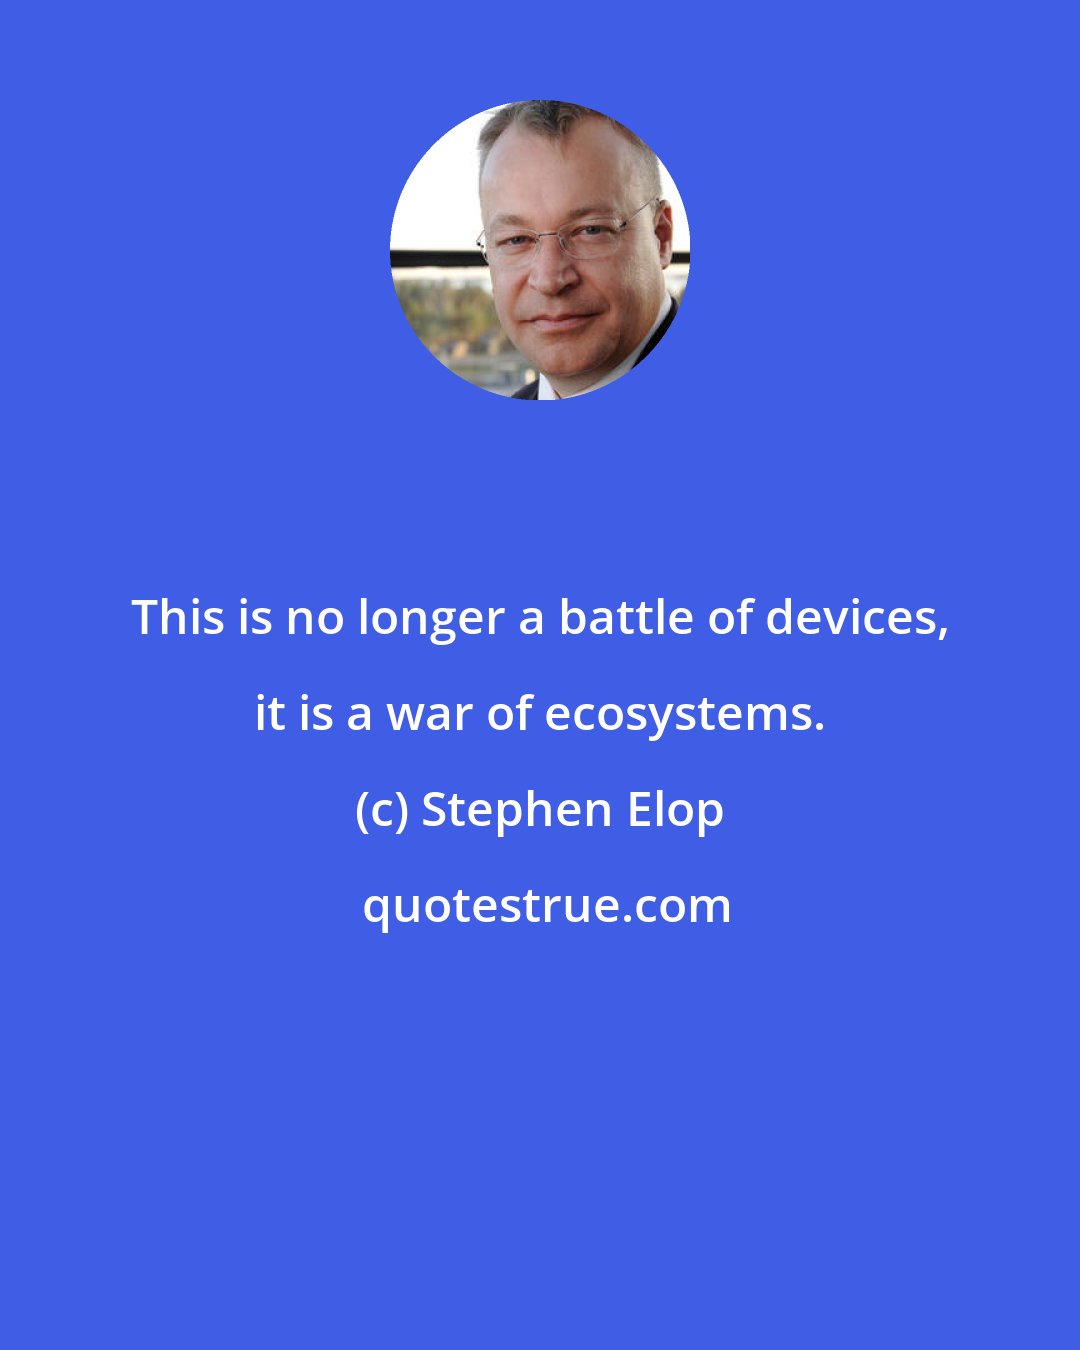 Stephen Elop: This is no longer a battle of devices, it is a war of ecosystems.